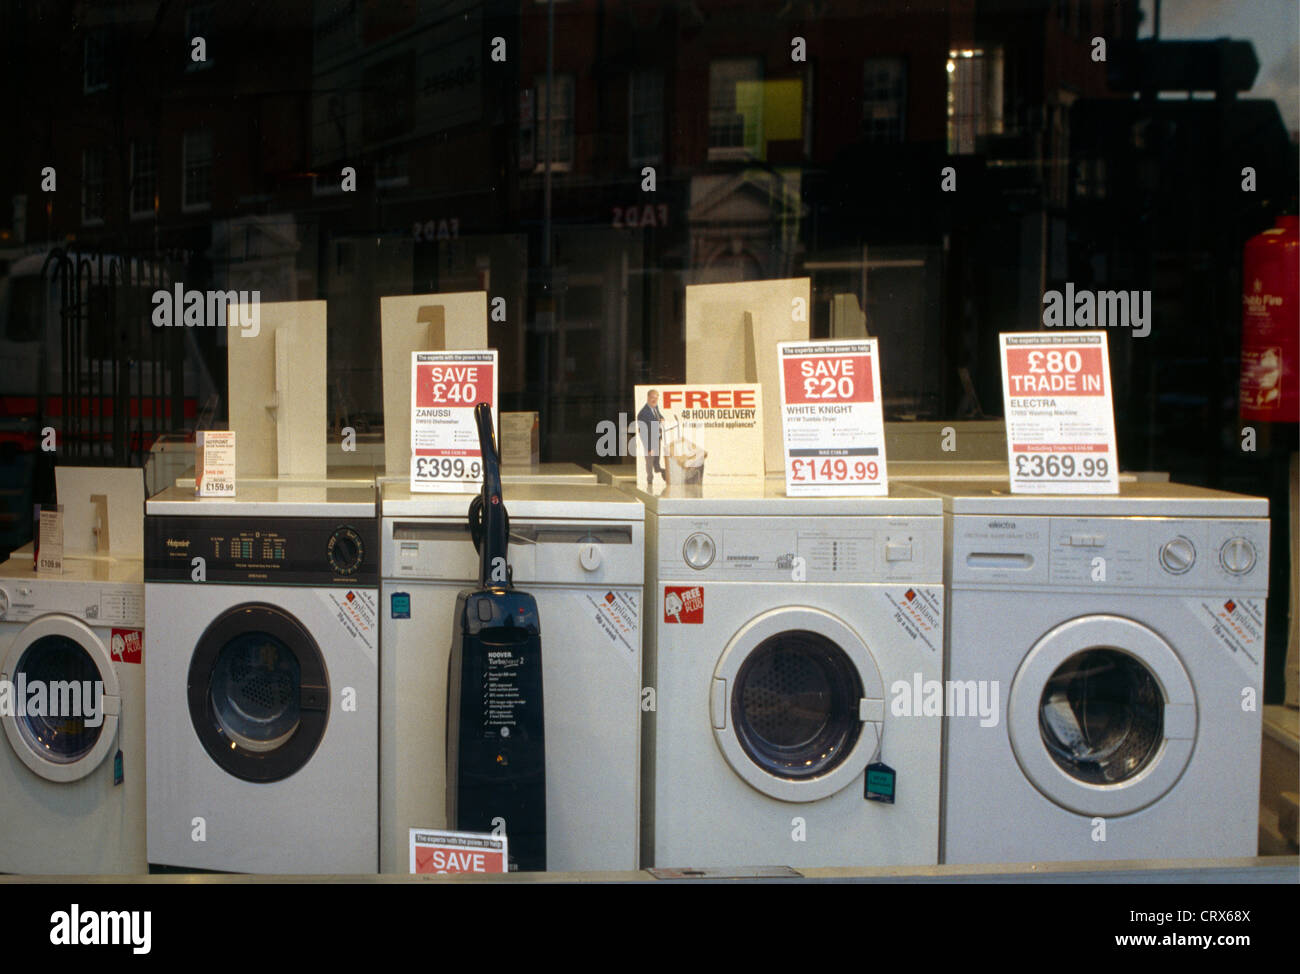 Electrical Goods In Shop Window Stock Photo